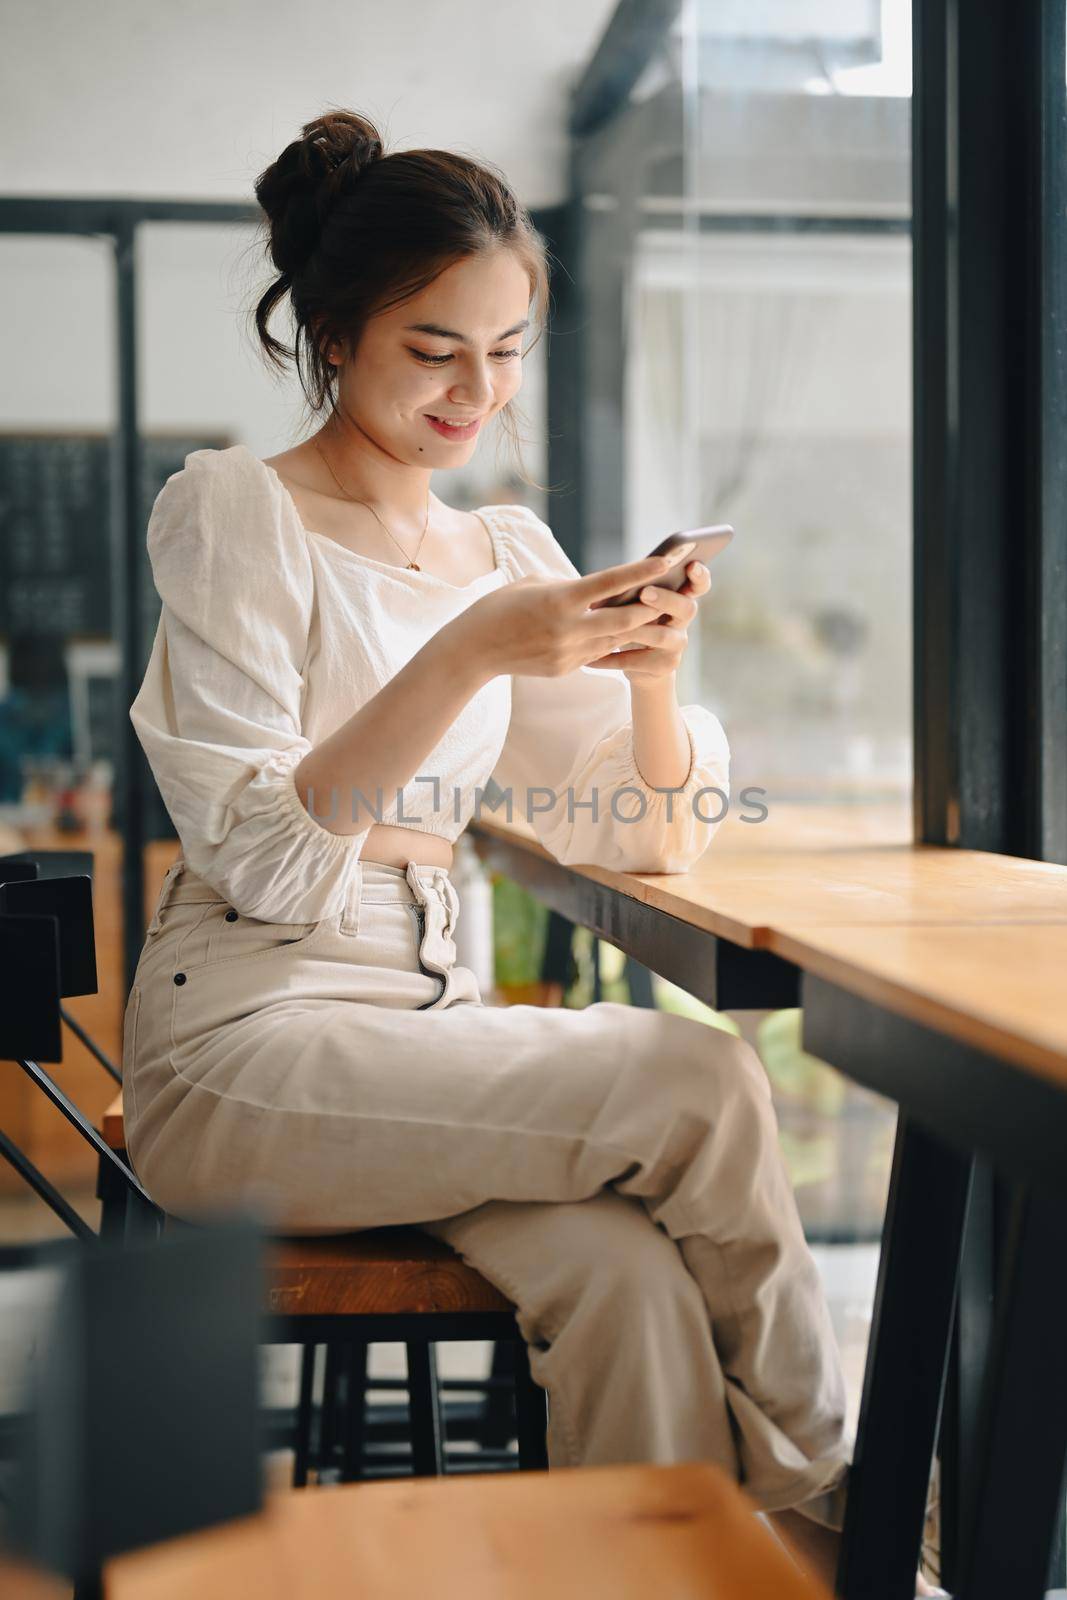 Beautiful young woman using mobile phone, commenting in online community by prathanchorruangsak